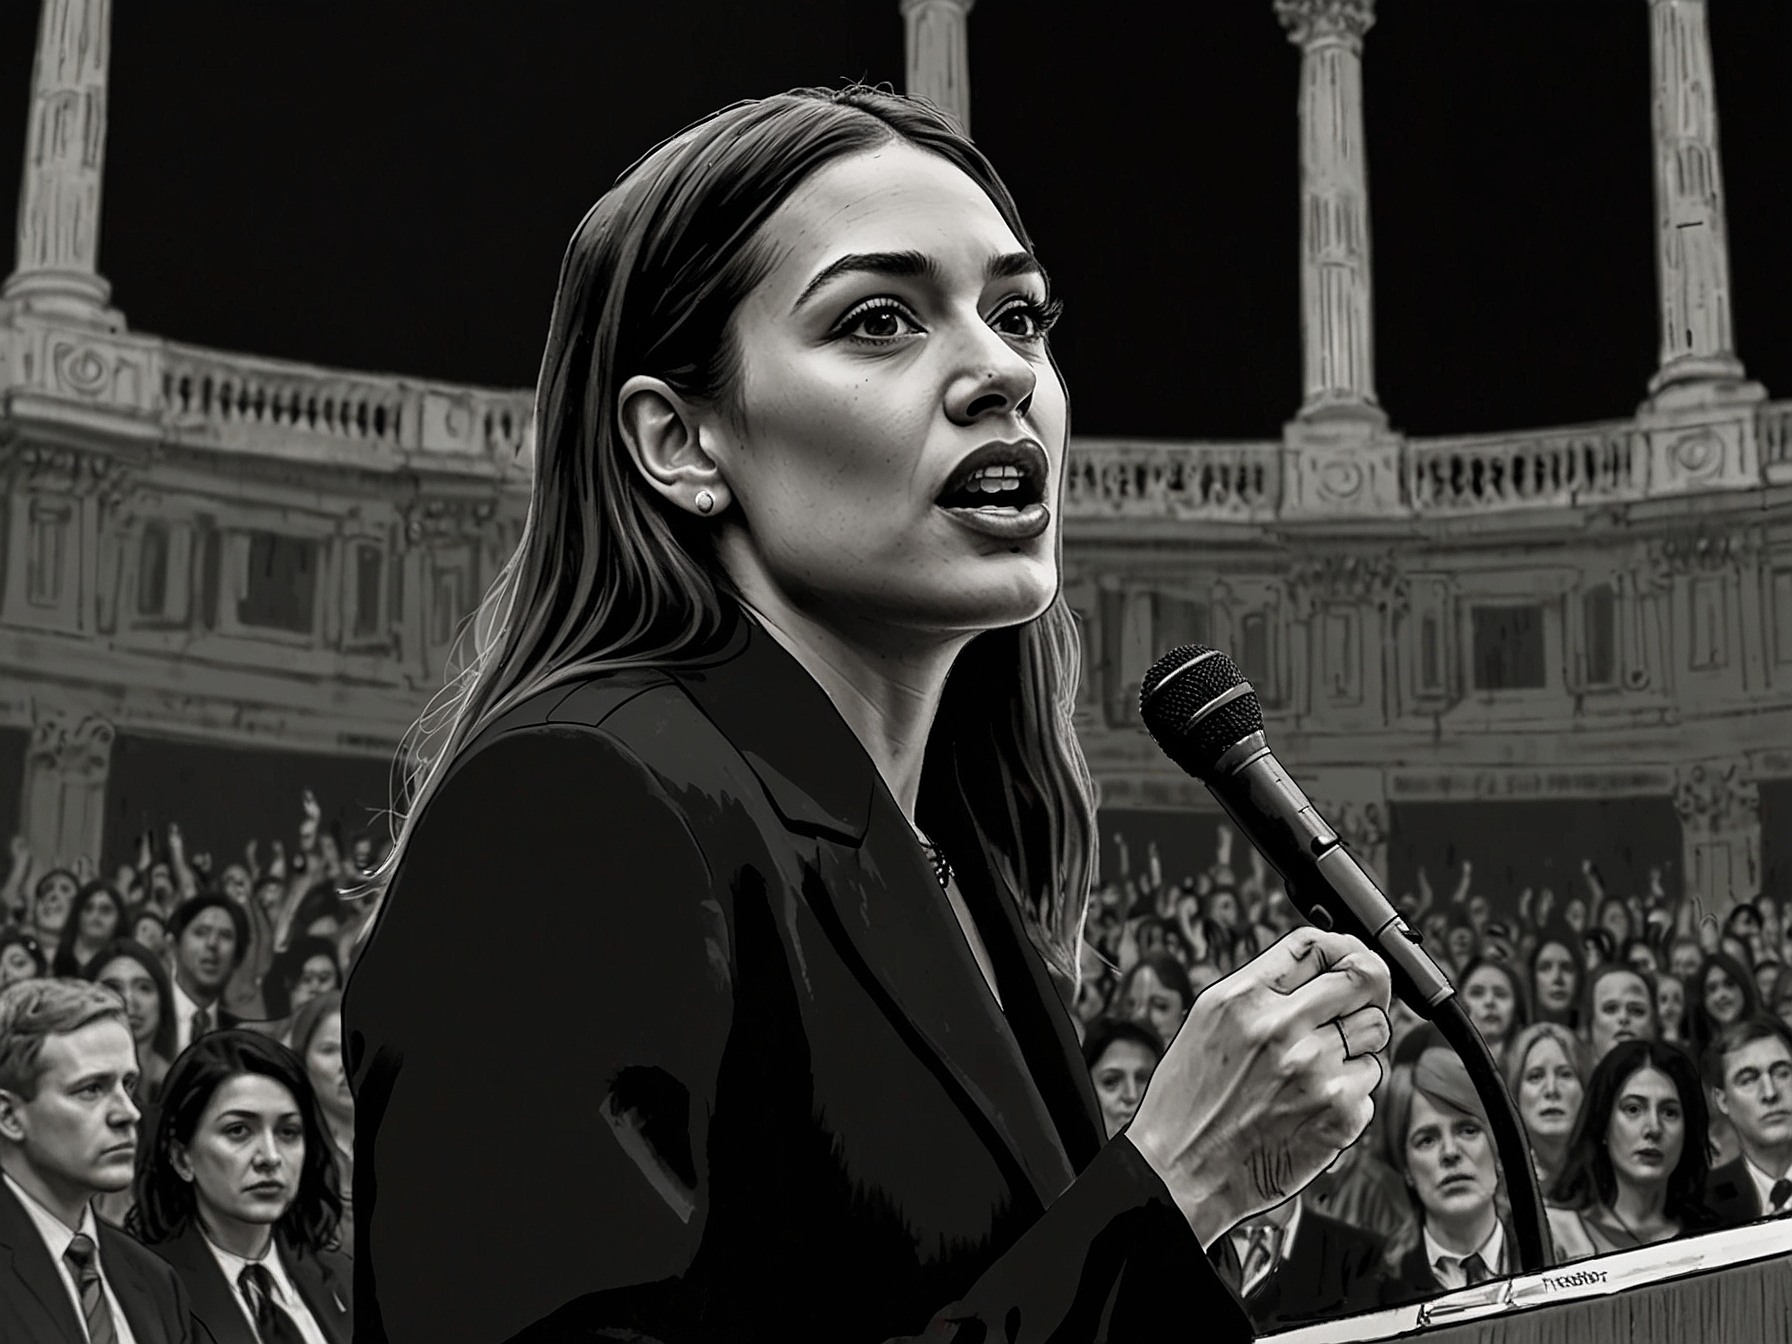 Alexandria Ocasio-Cortez, speaking passionately at a public event, outlines her intentions to file articles of impeachment against the Supreme Court justices to uphold judicial accountability.